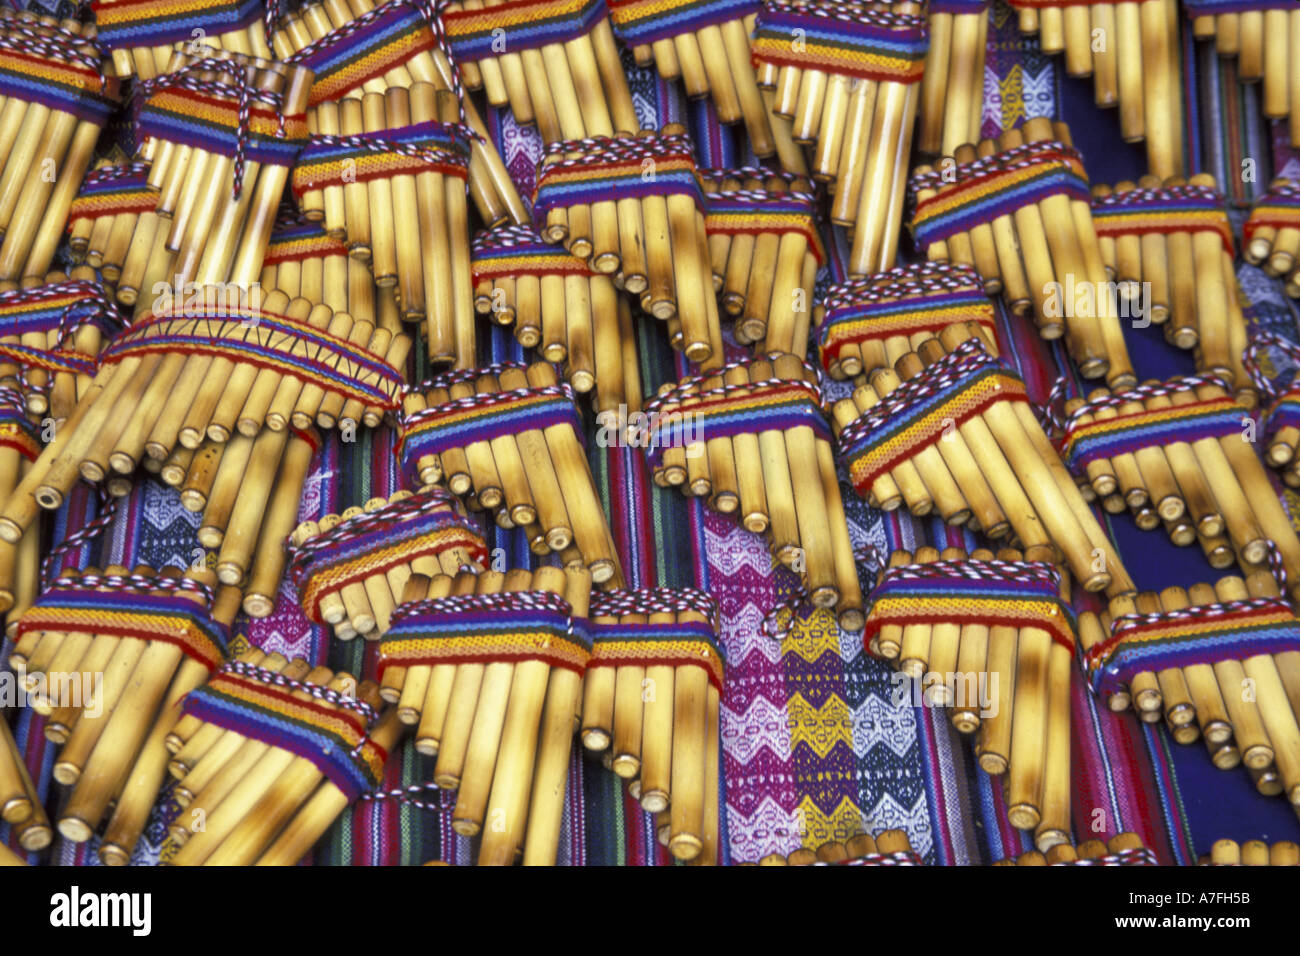 Pan Flutes High Resolution Stock Photography and Images - Alamy